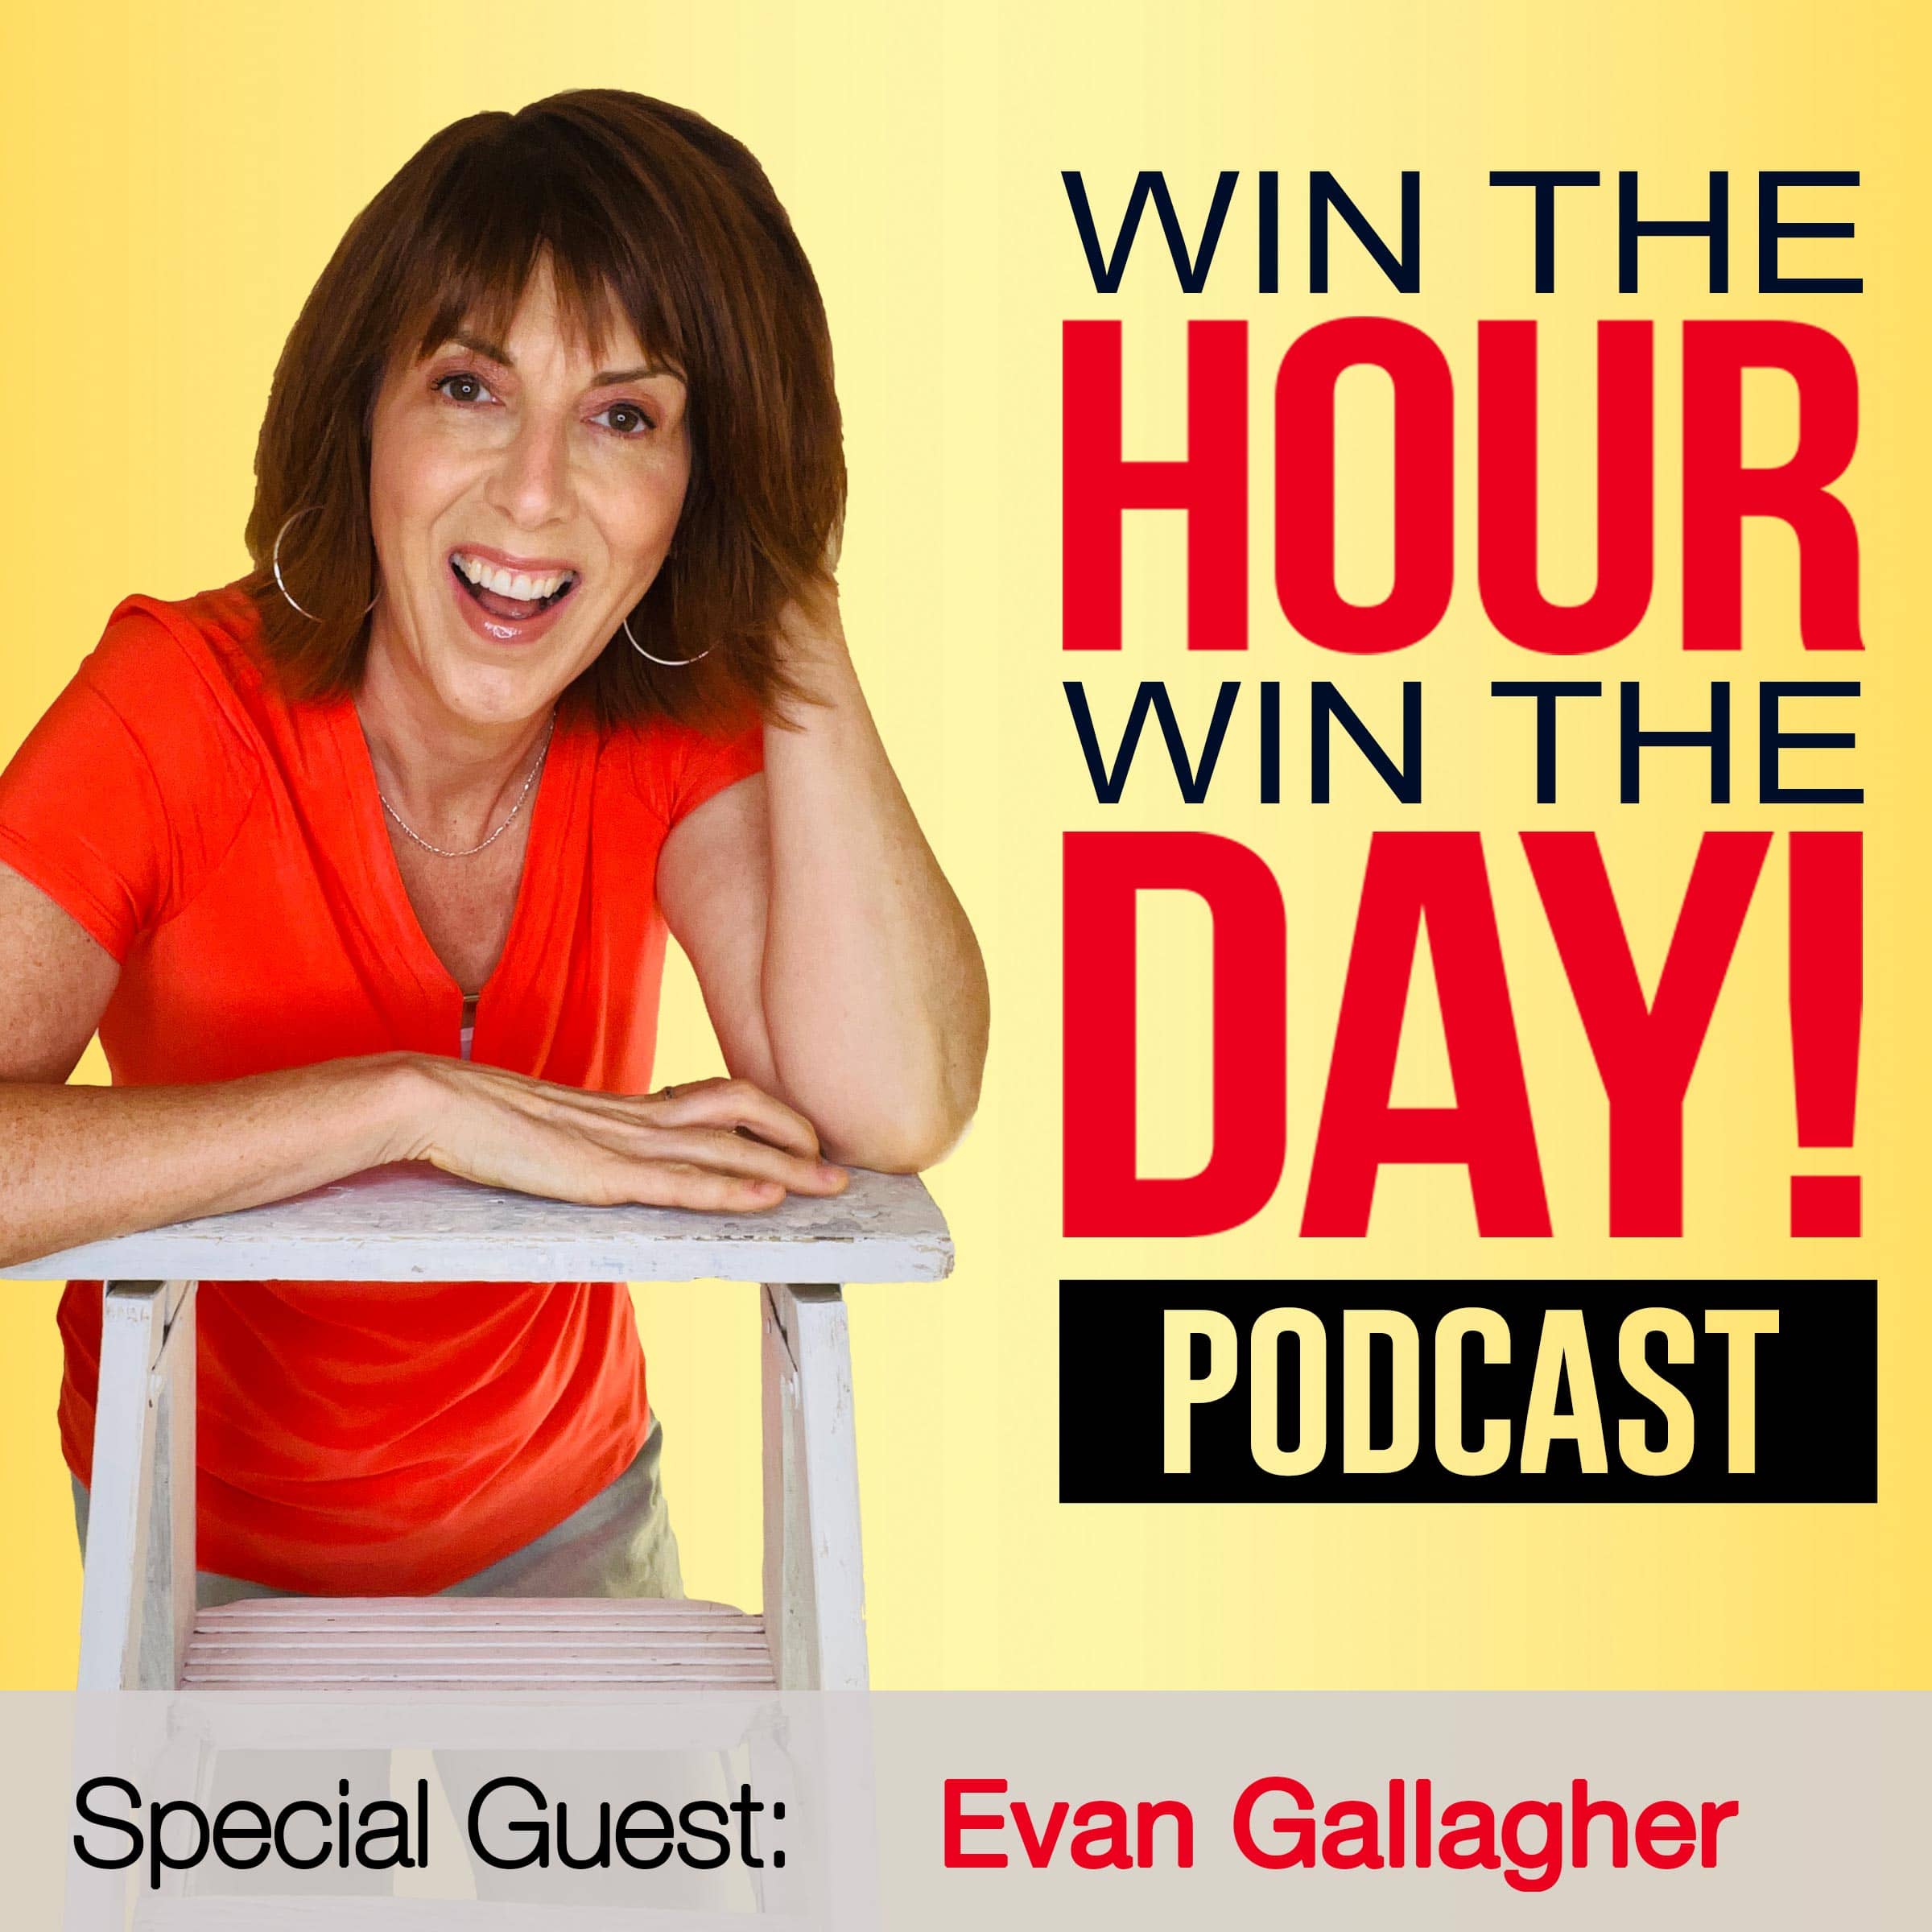 Get 10x More Done By Planning Your Time! with Evan Gallagher